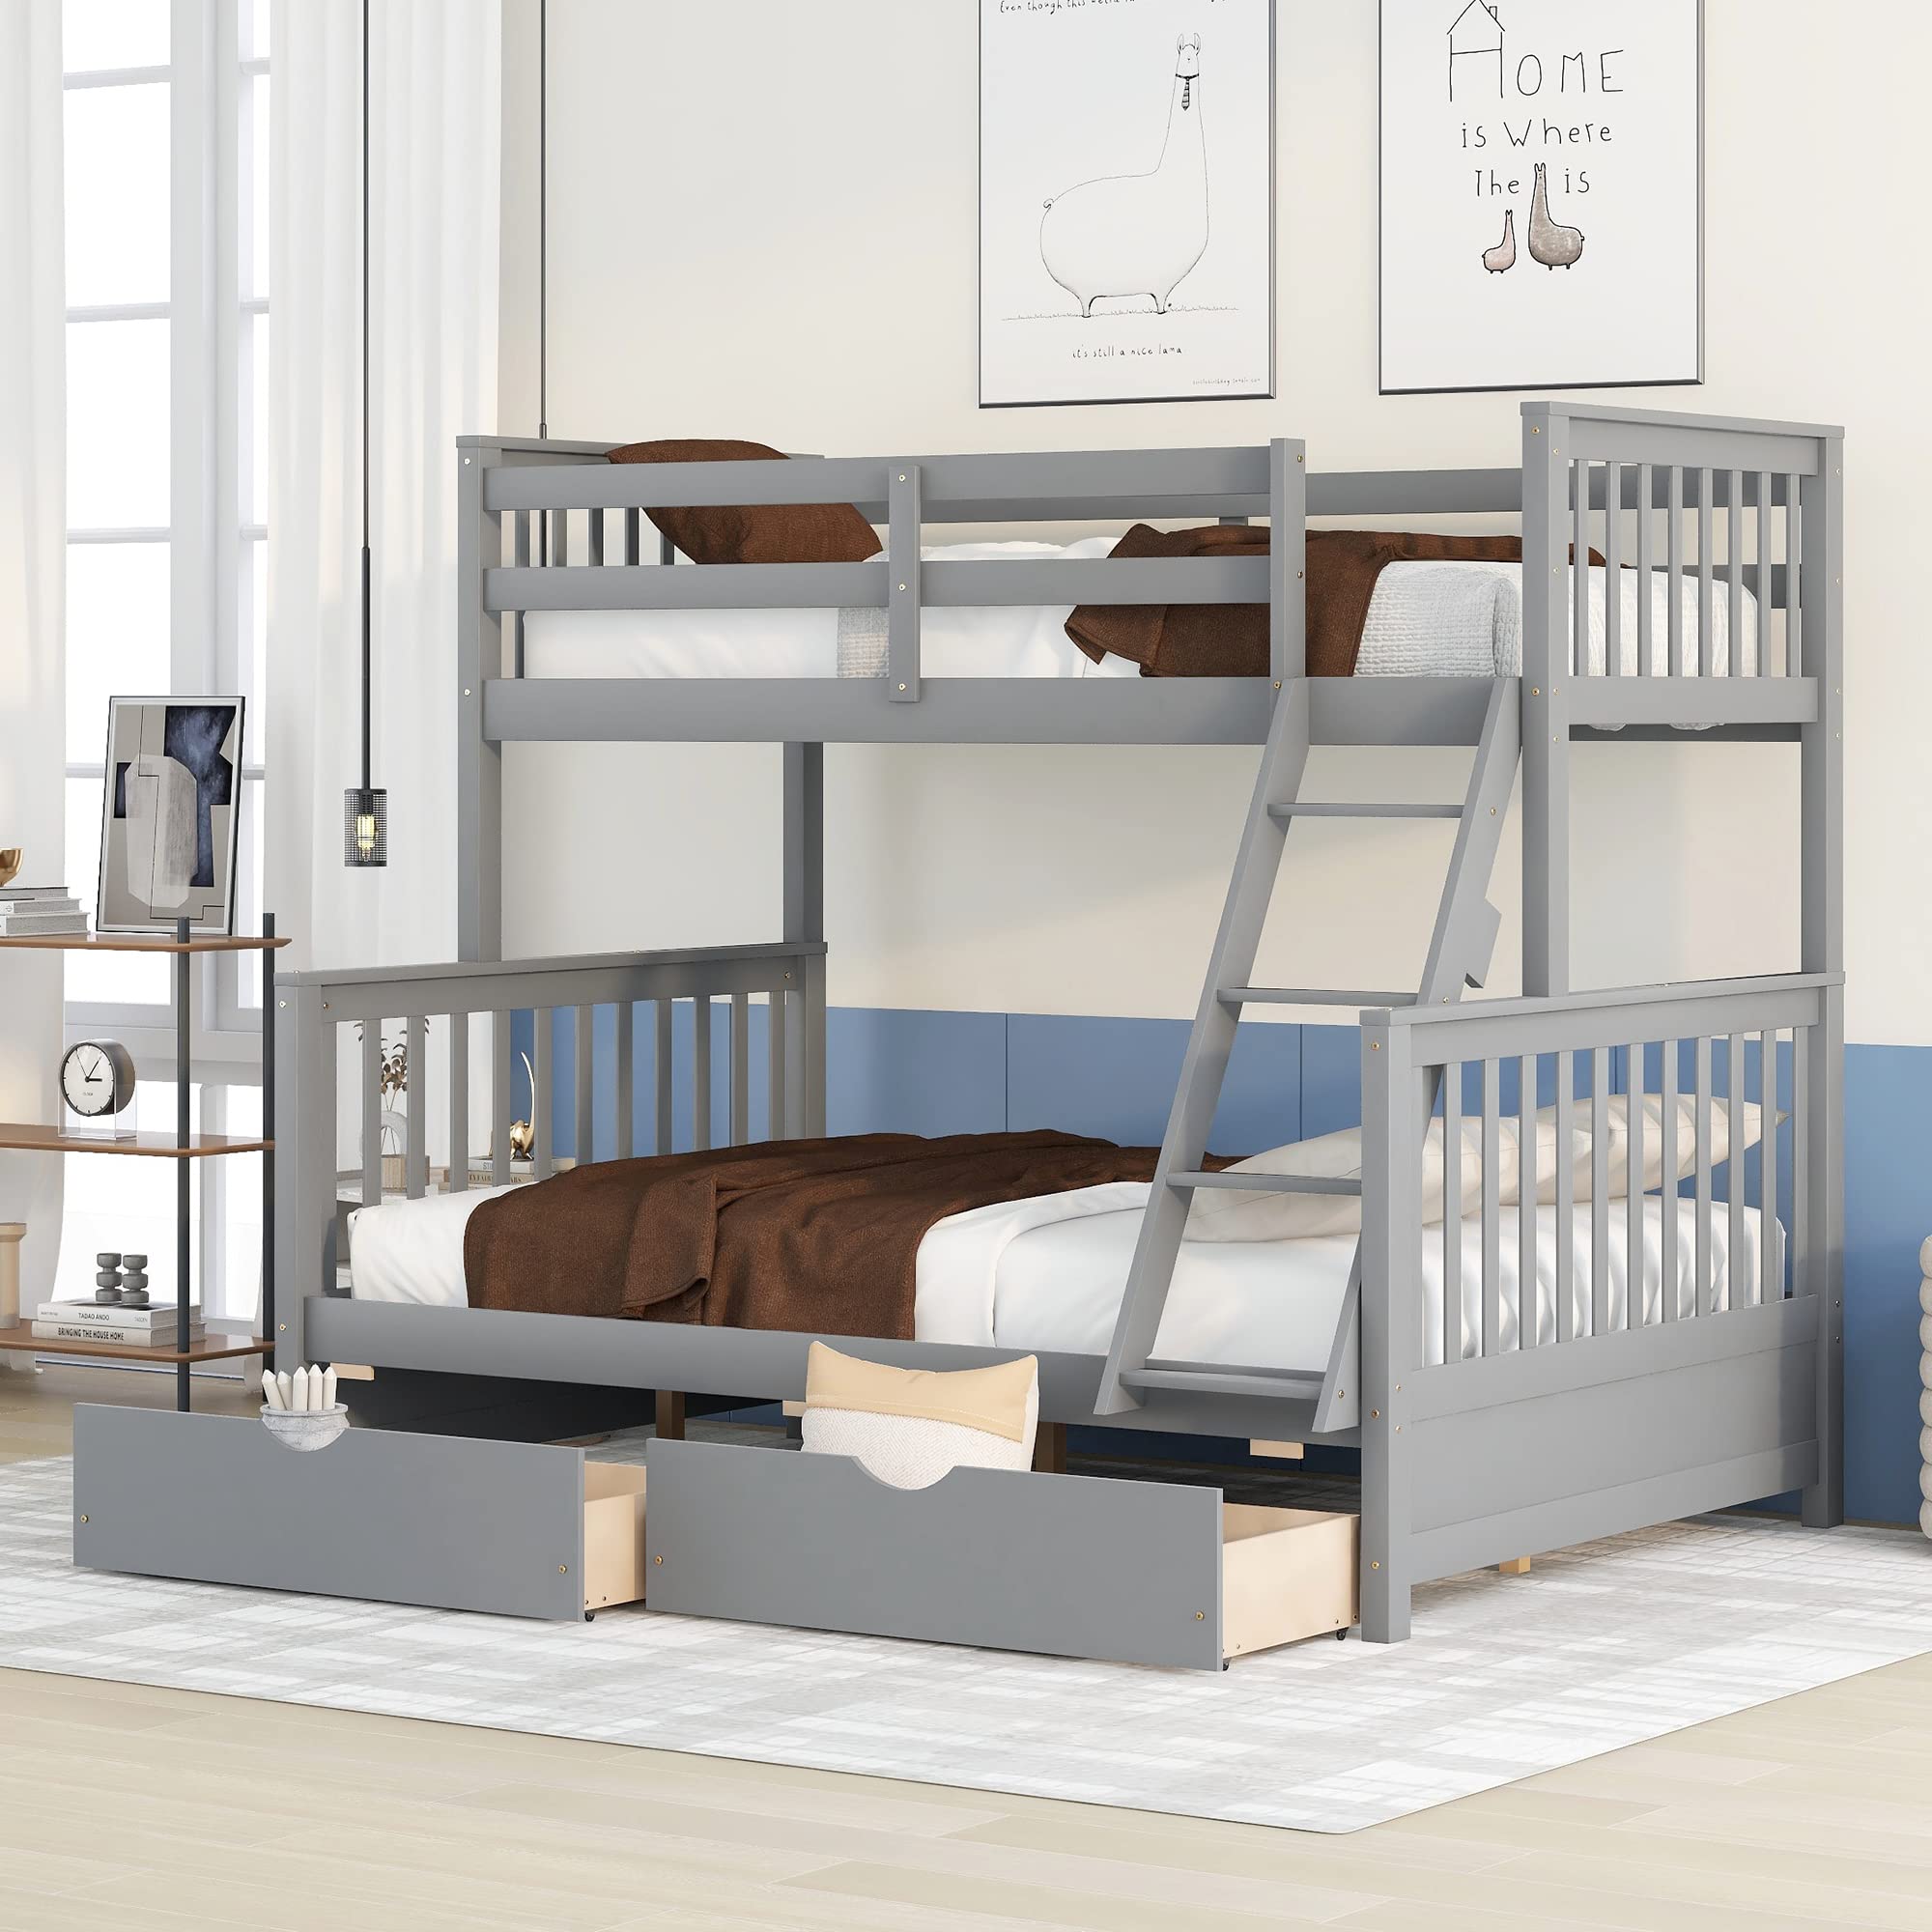 Harper & Bright Designs Bunk Bed with Drawers, Twin Over Full Bunk Bed, Solid Wood Bunk Bed Frame with Ladders & 2 Storage Drawe